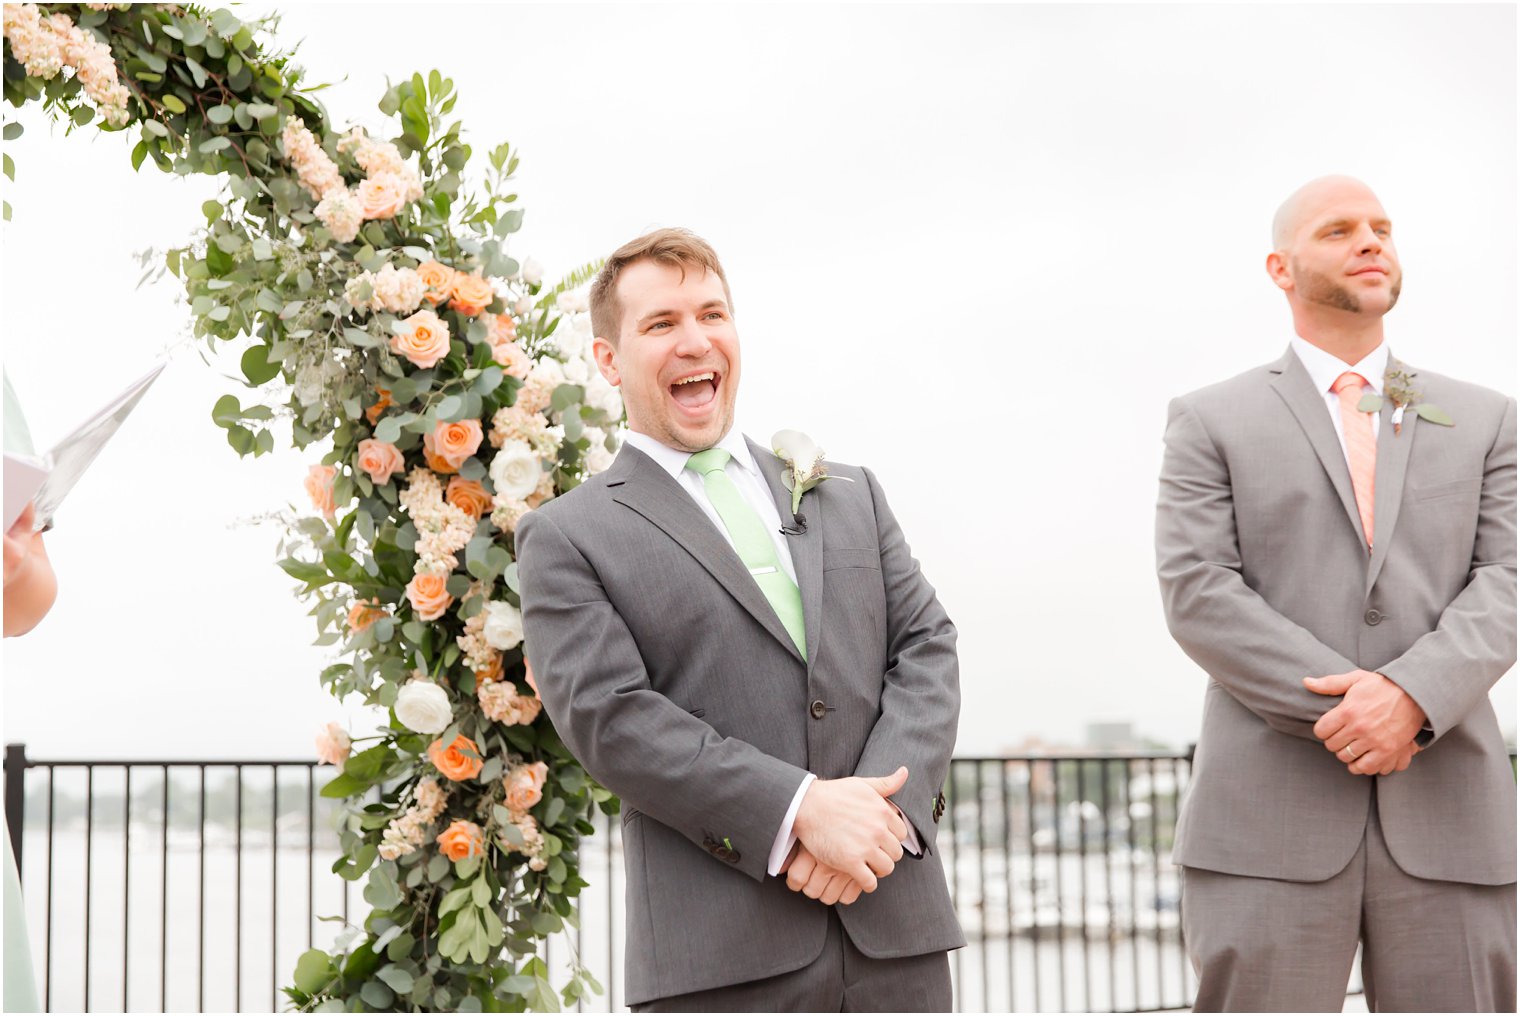 Groom's look of surprise after seeing his bride during outdoor ceremony